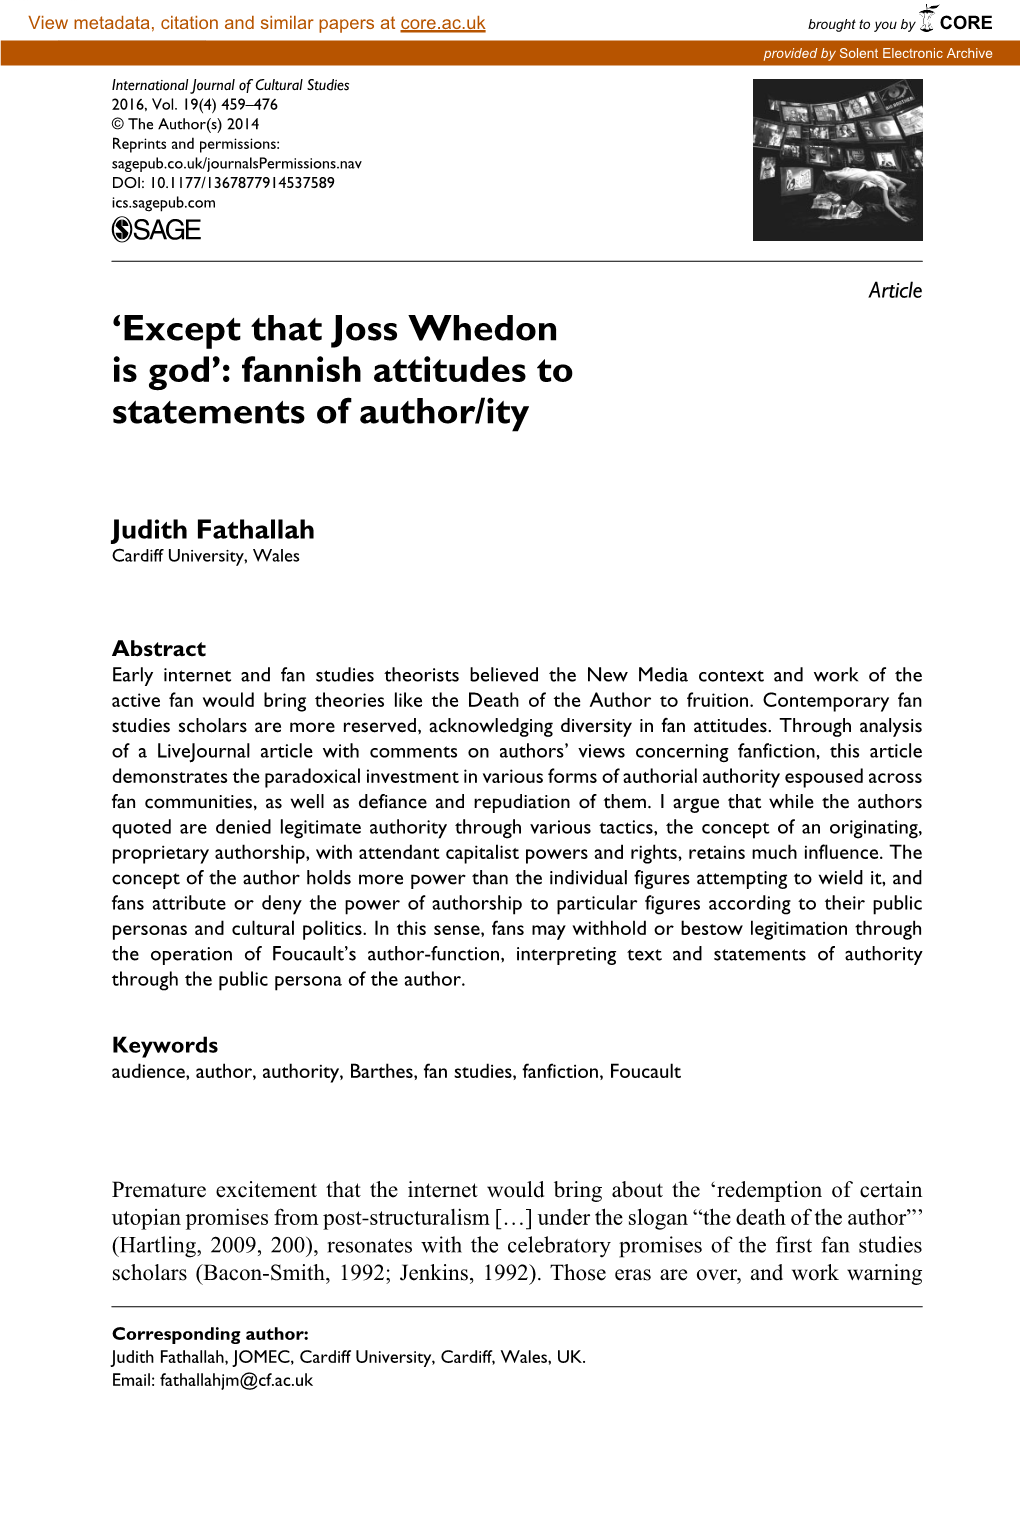 Except That Joss Whedon Is God’: Fannish Attitudes to Statements of Author/Ity